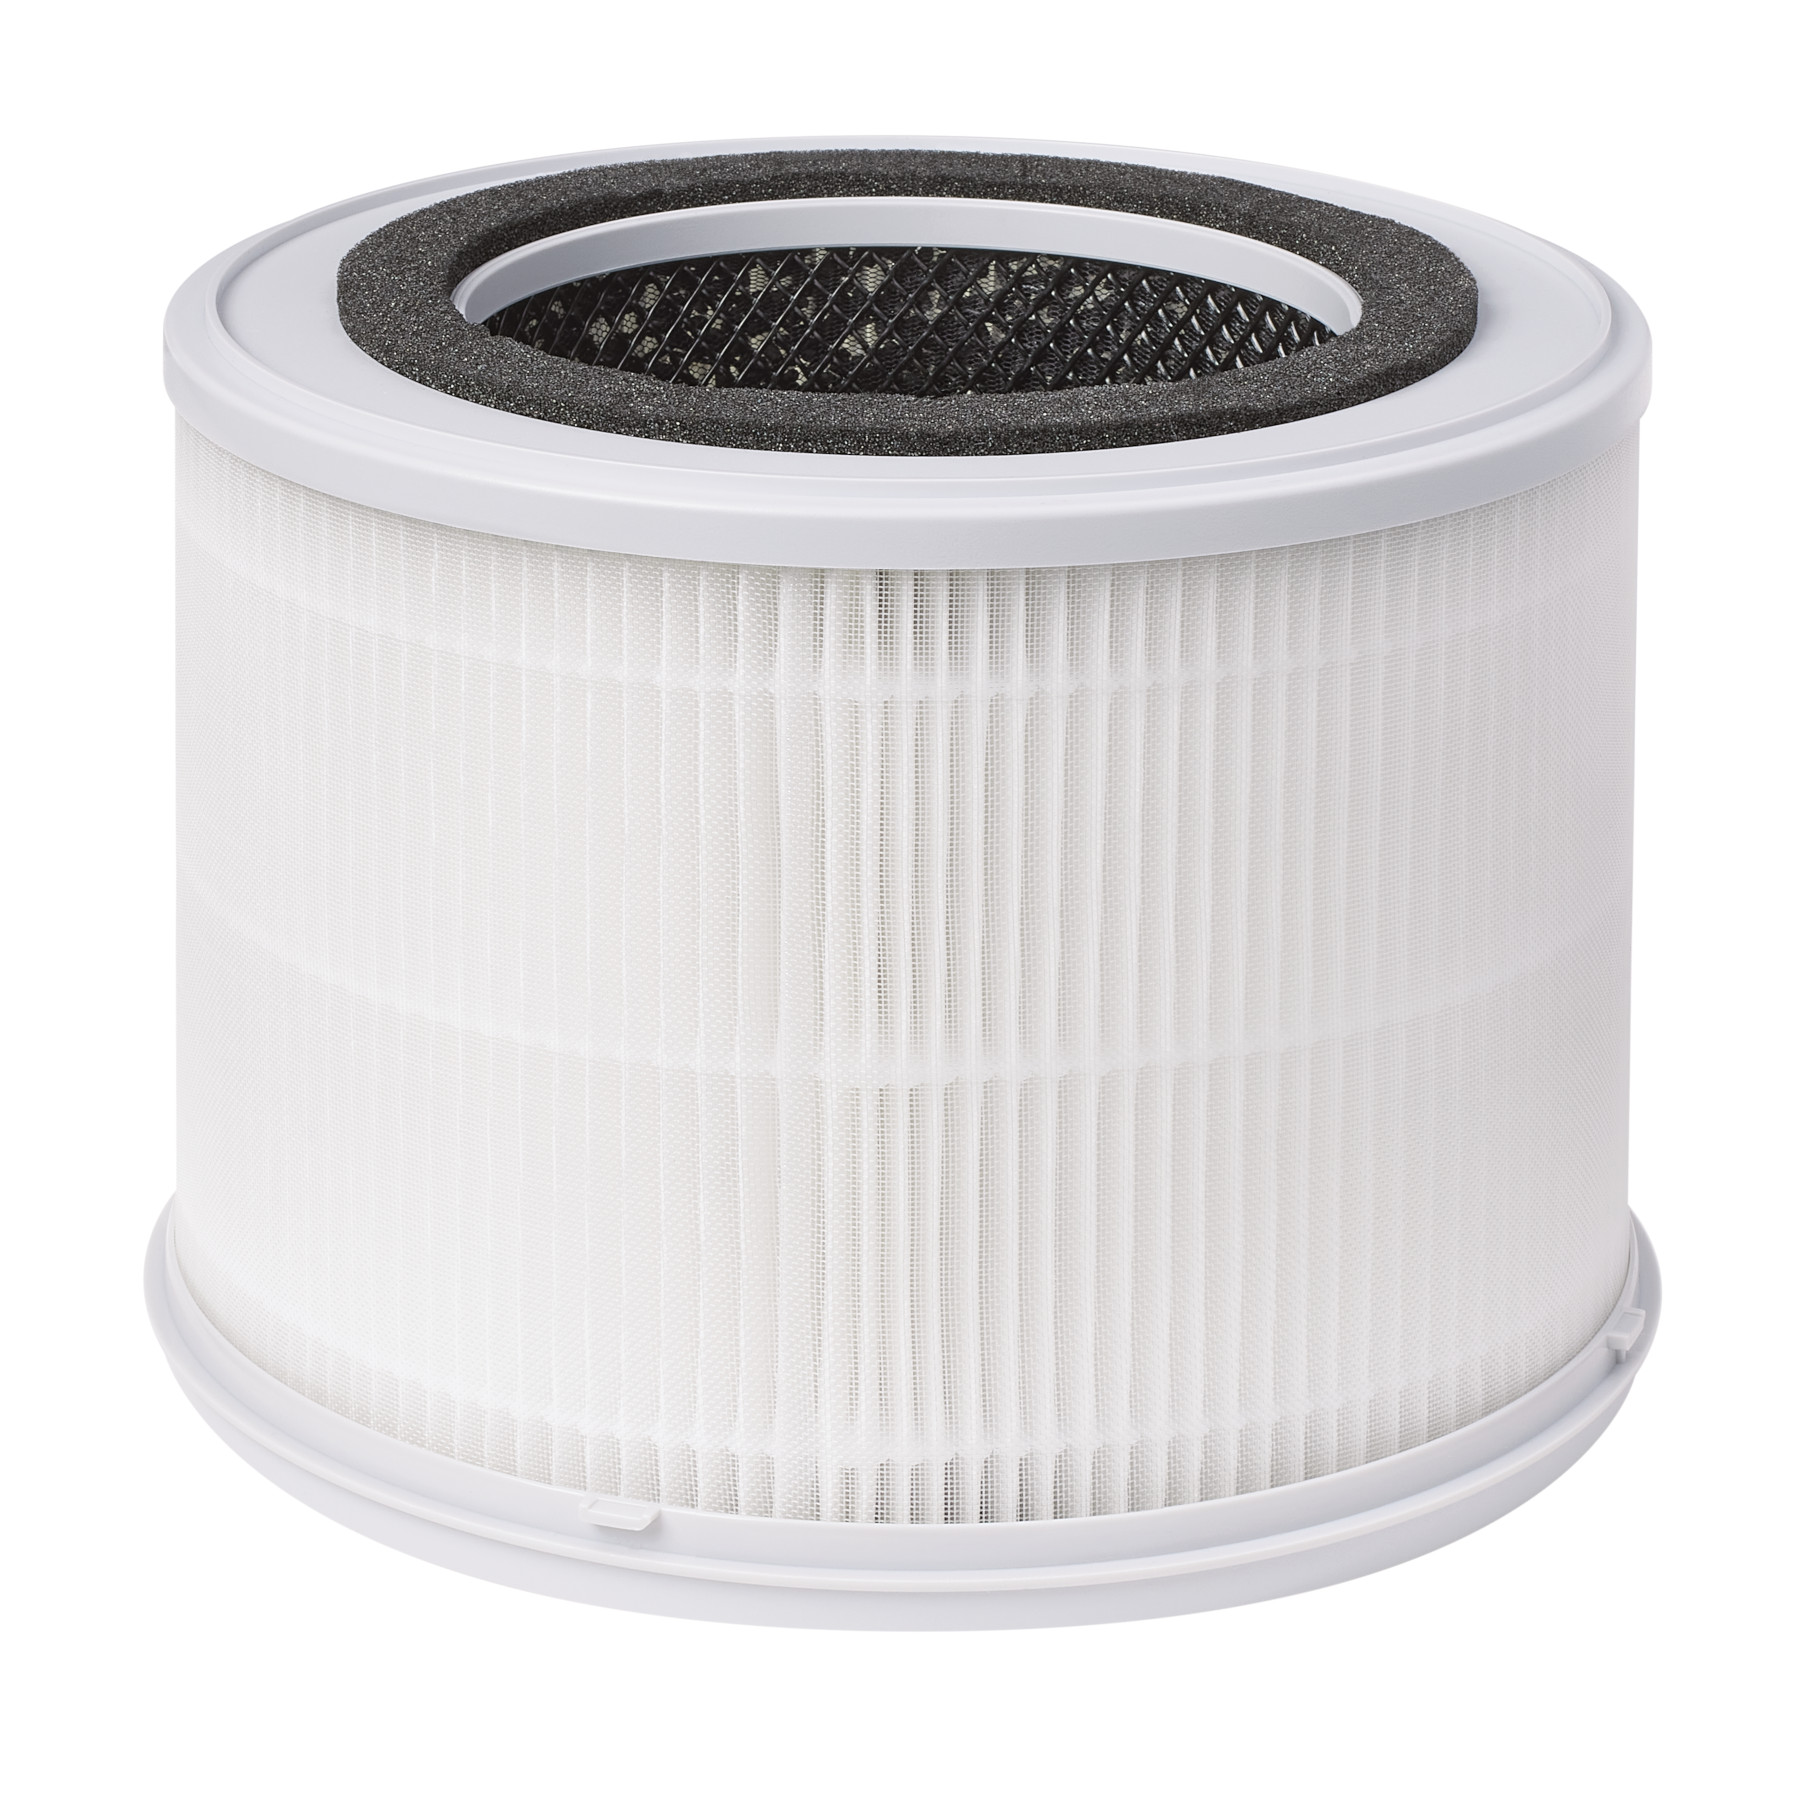 BPAPFA Grease Filter with Antimicrobial Protection for AP1 and RP1